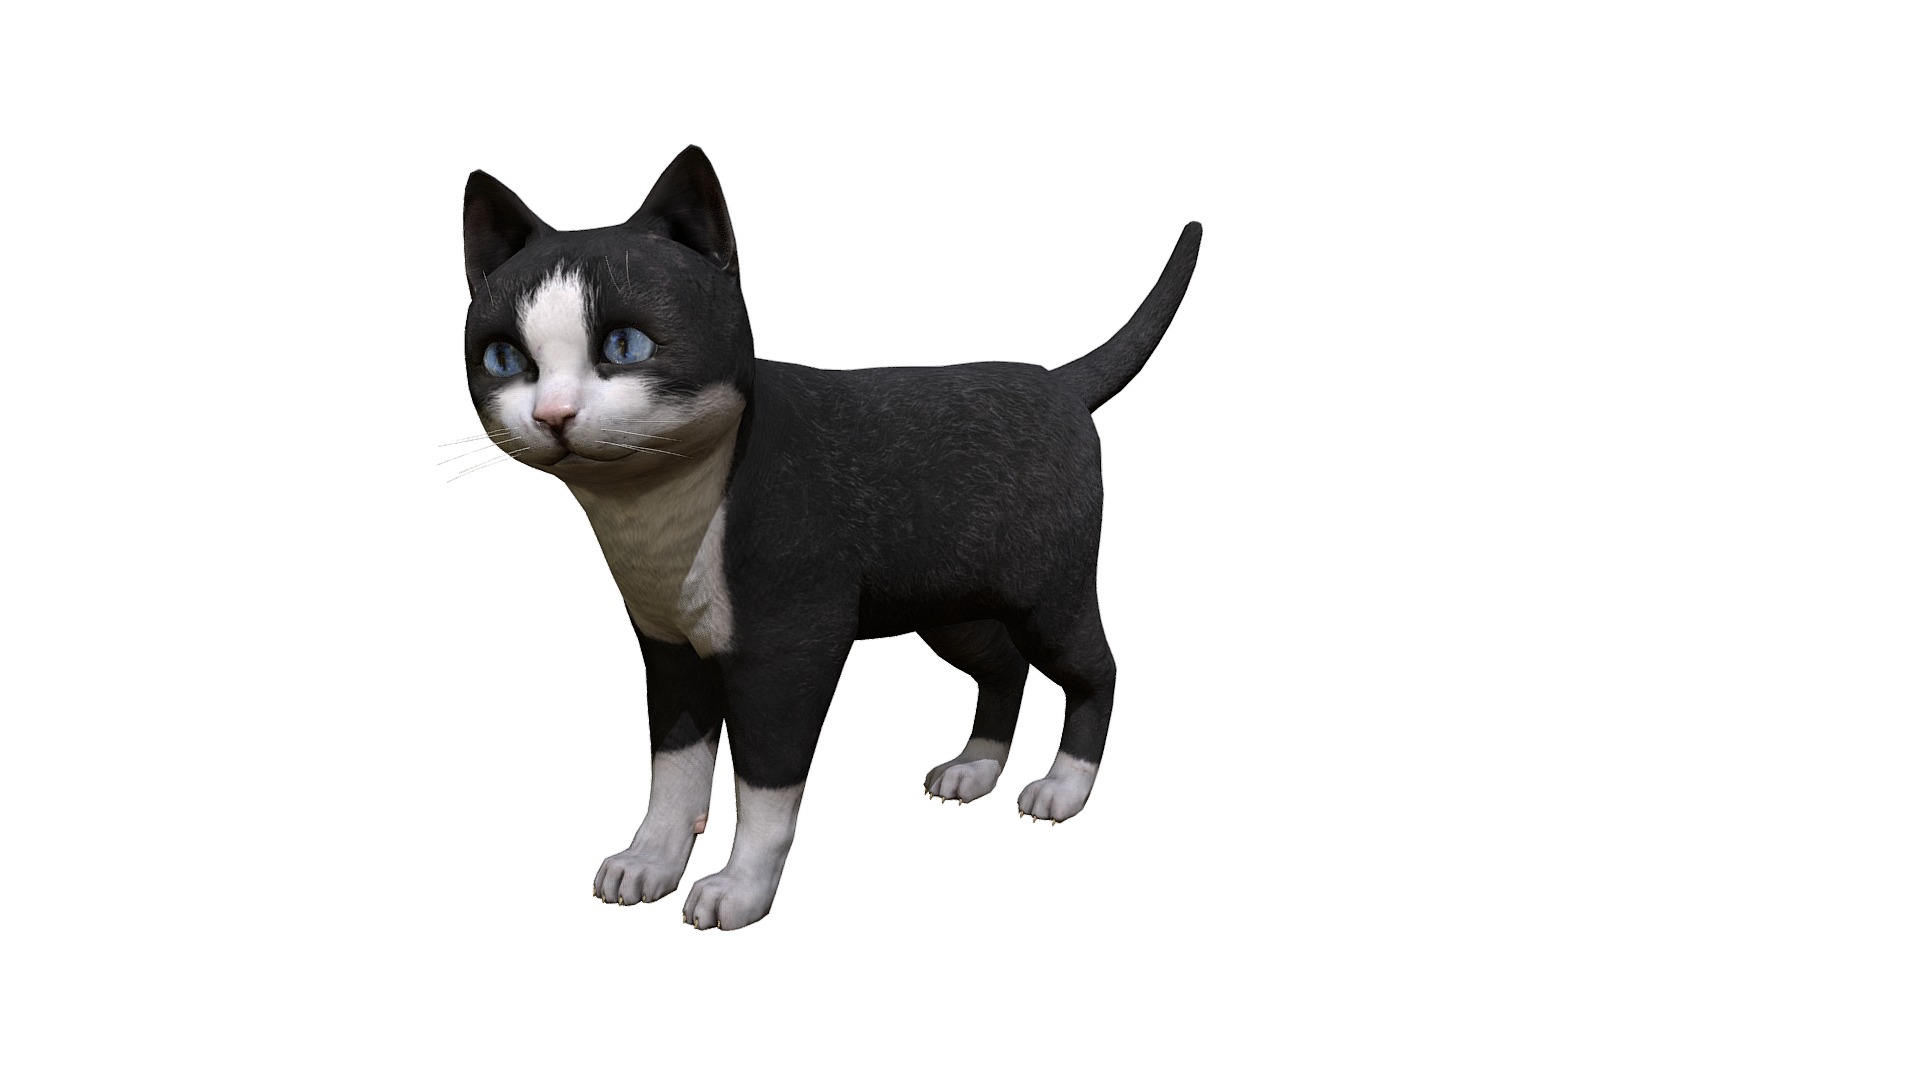 3D model Kitten black - This is a 3D model of the Kitten black. The 3D model is about a black and white cat.